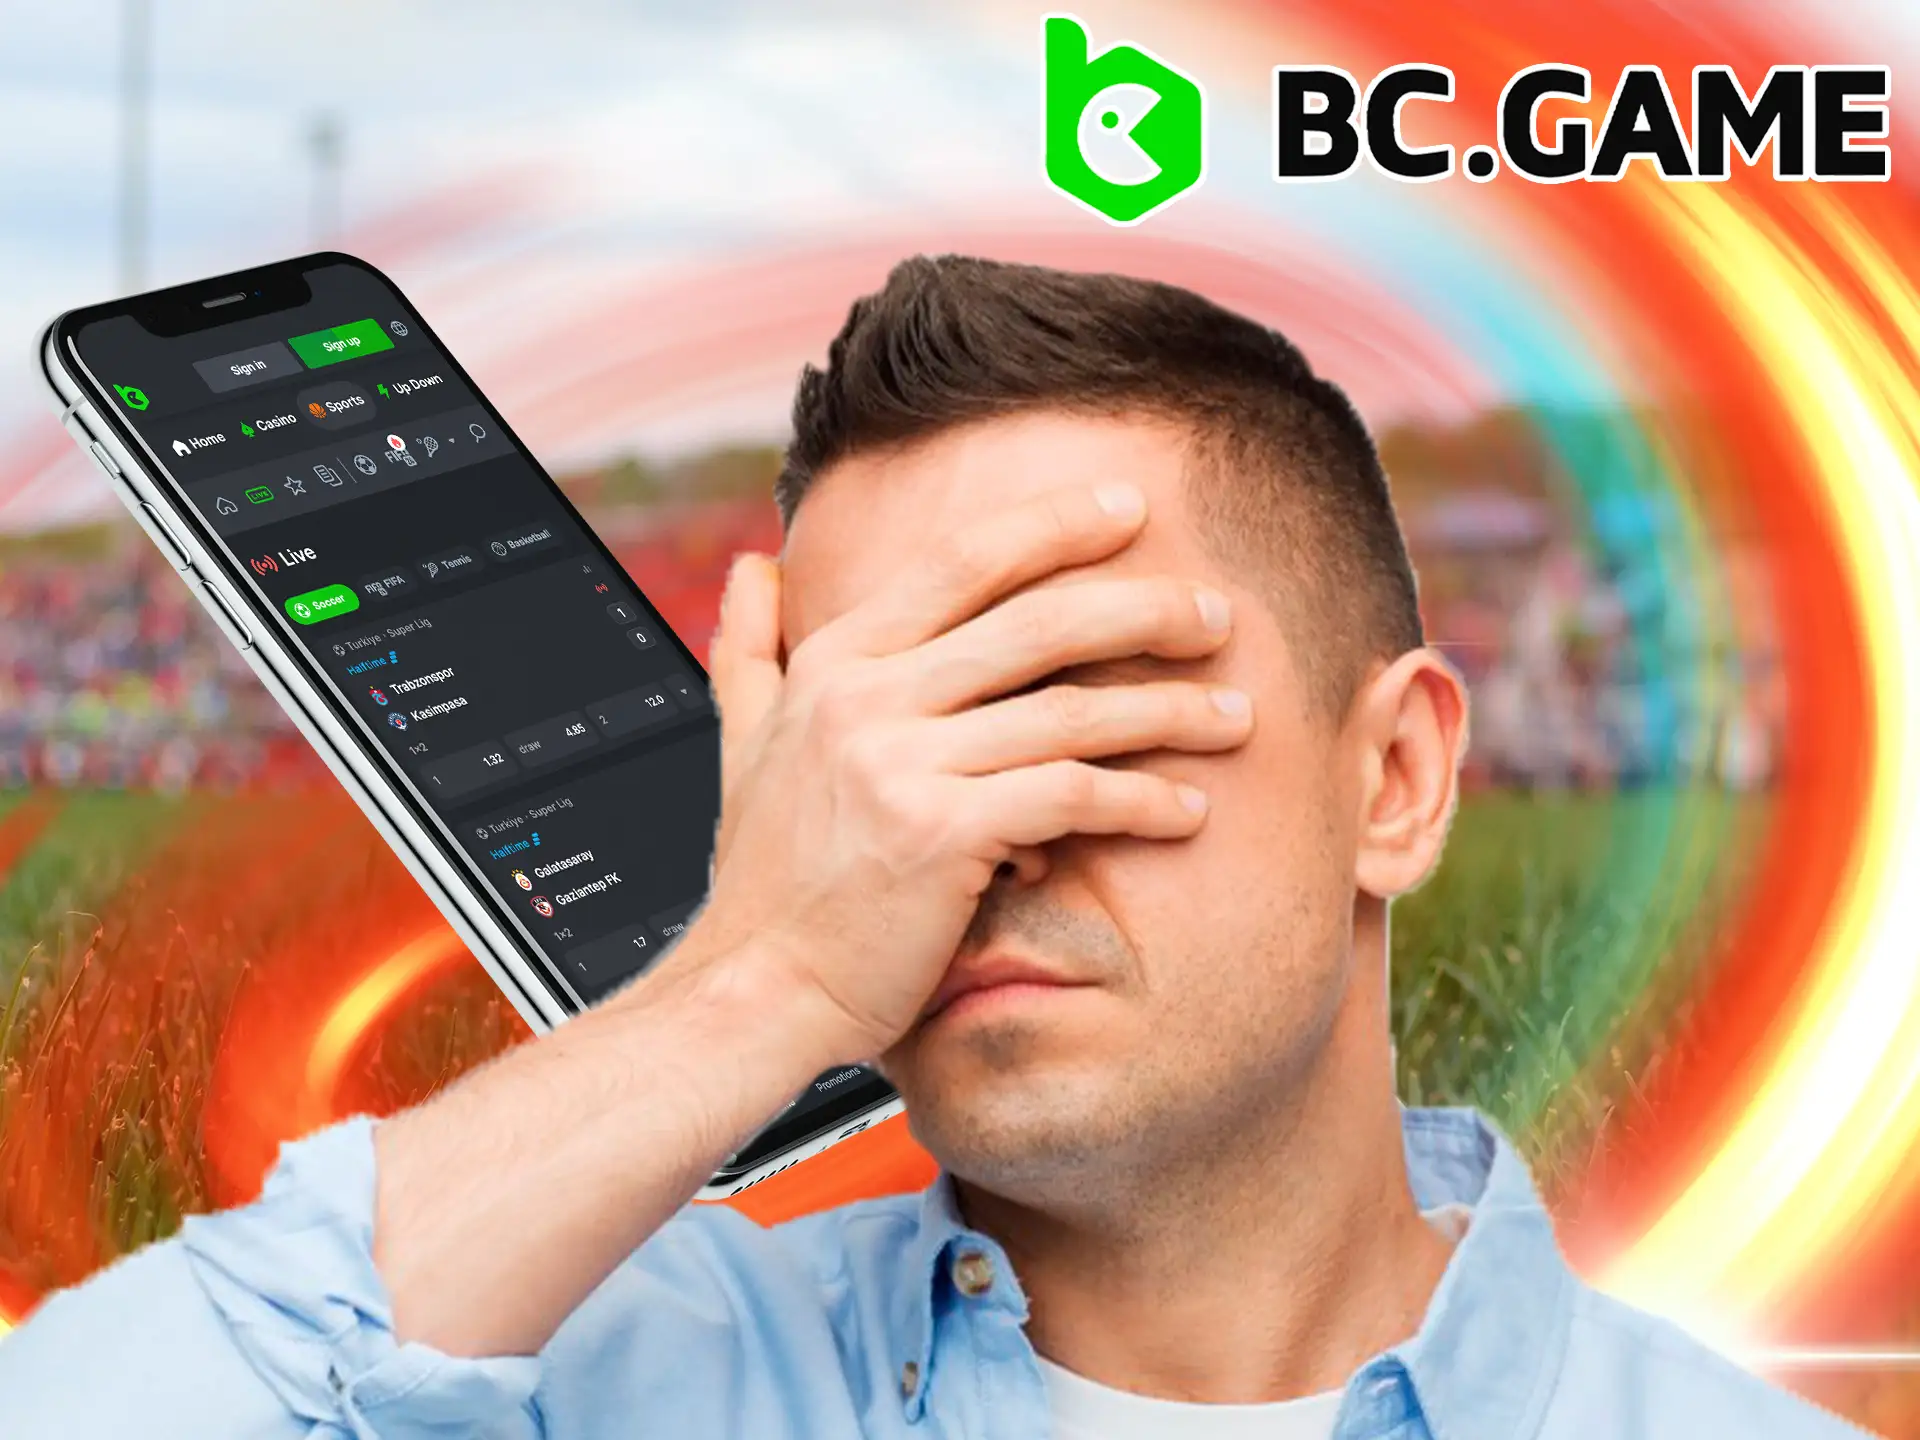 BC GAME helps users to control themselves, allows them to play only from the age of 18, as well as control betting costs.